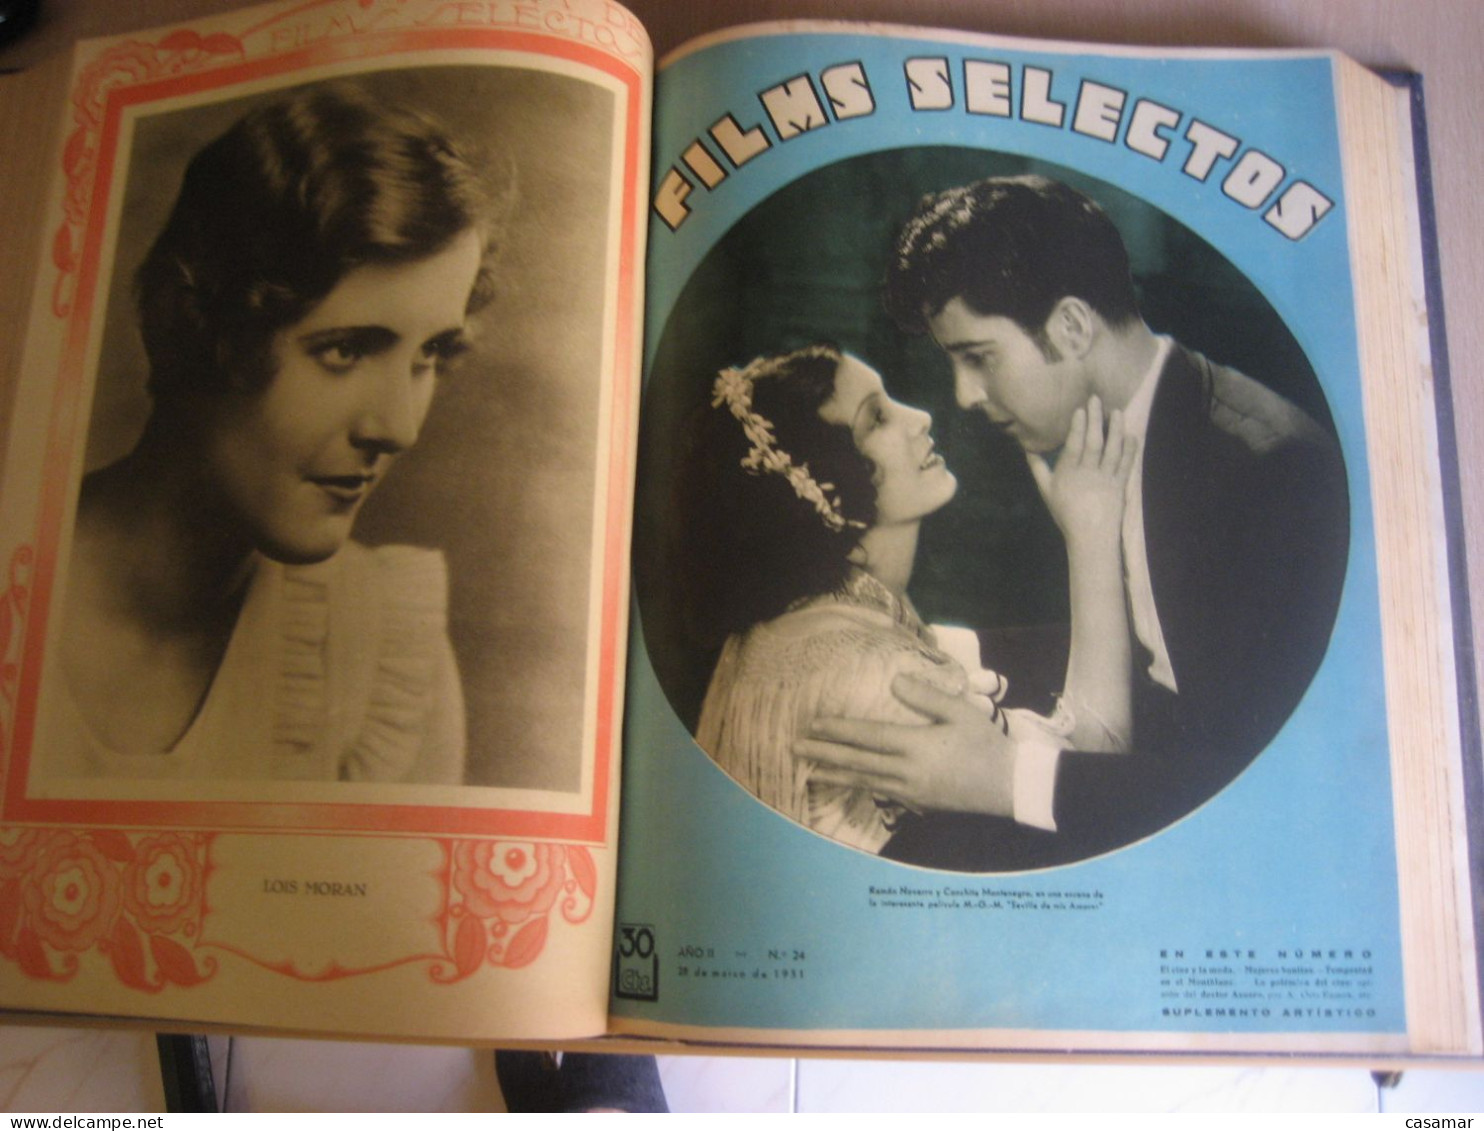 FILMS SELECTOS 12/37 1931 728 pgs. cine film cinema movie actor actress Weight +2kg CONSULT previously shipping costs